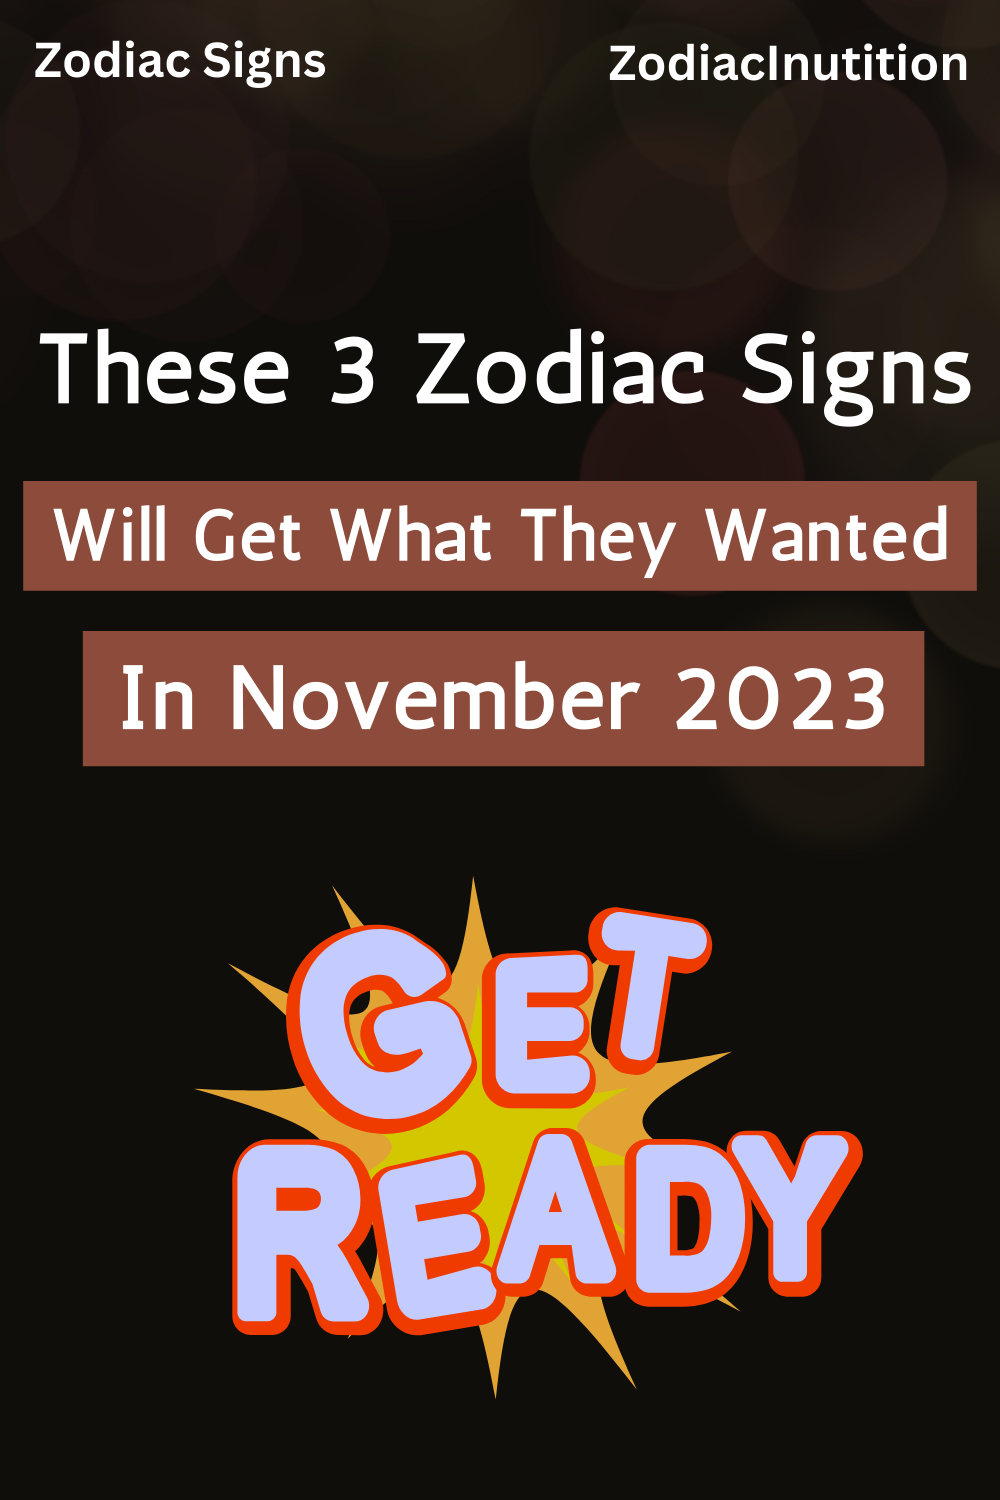 These 3 Zodiac Signs Will Get What They Wanted In November 2023